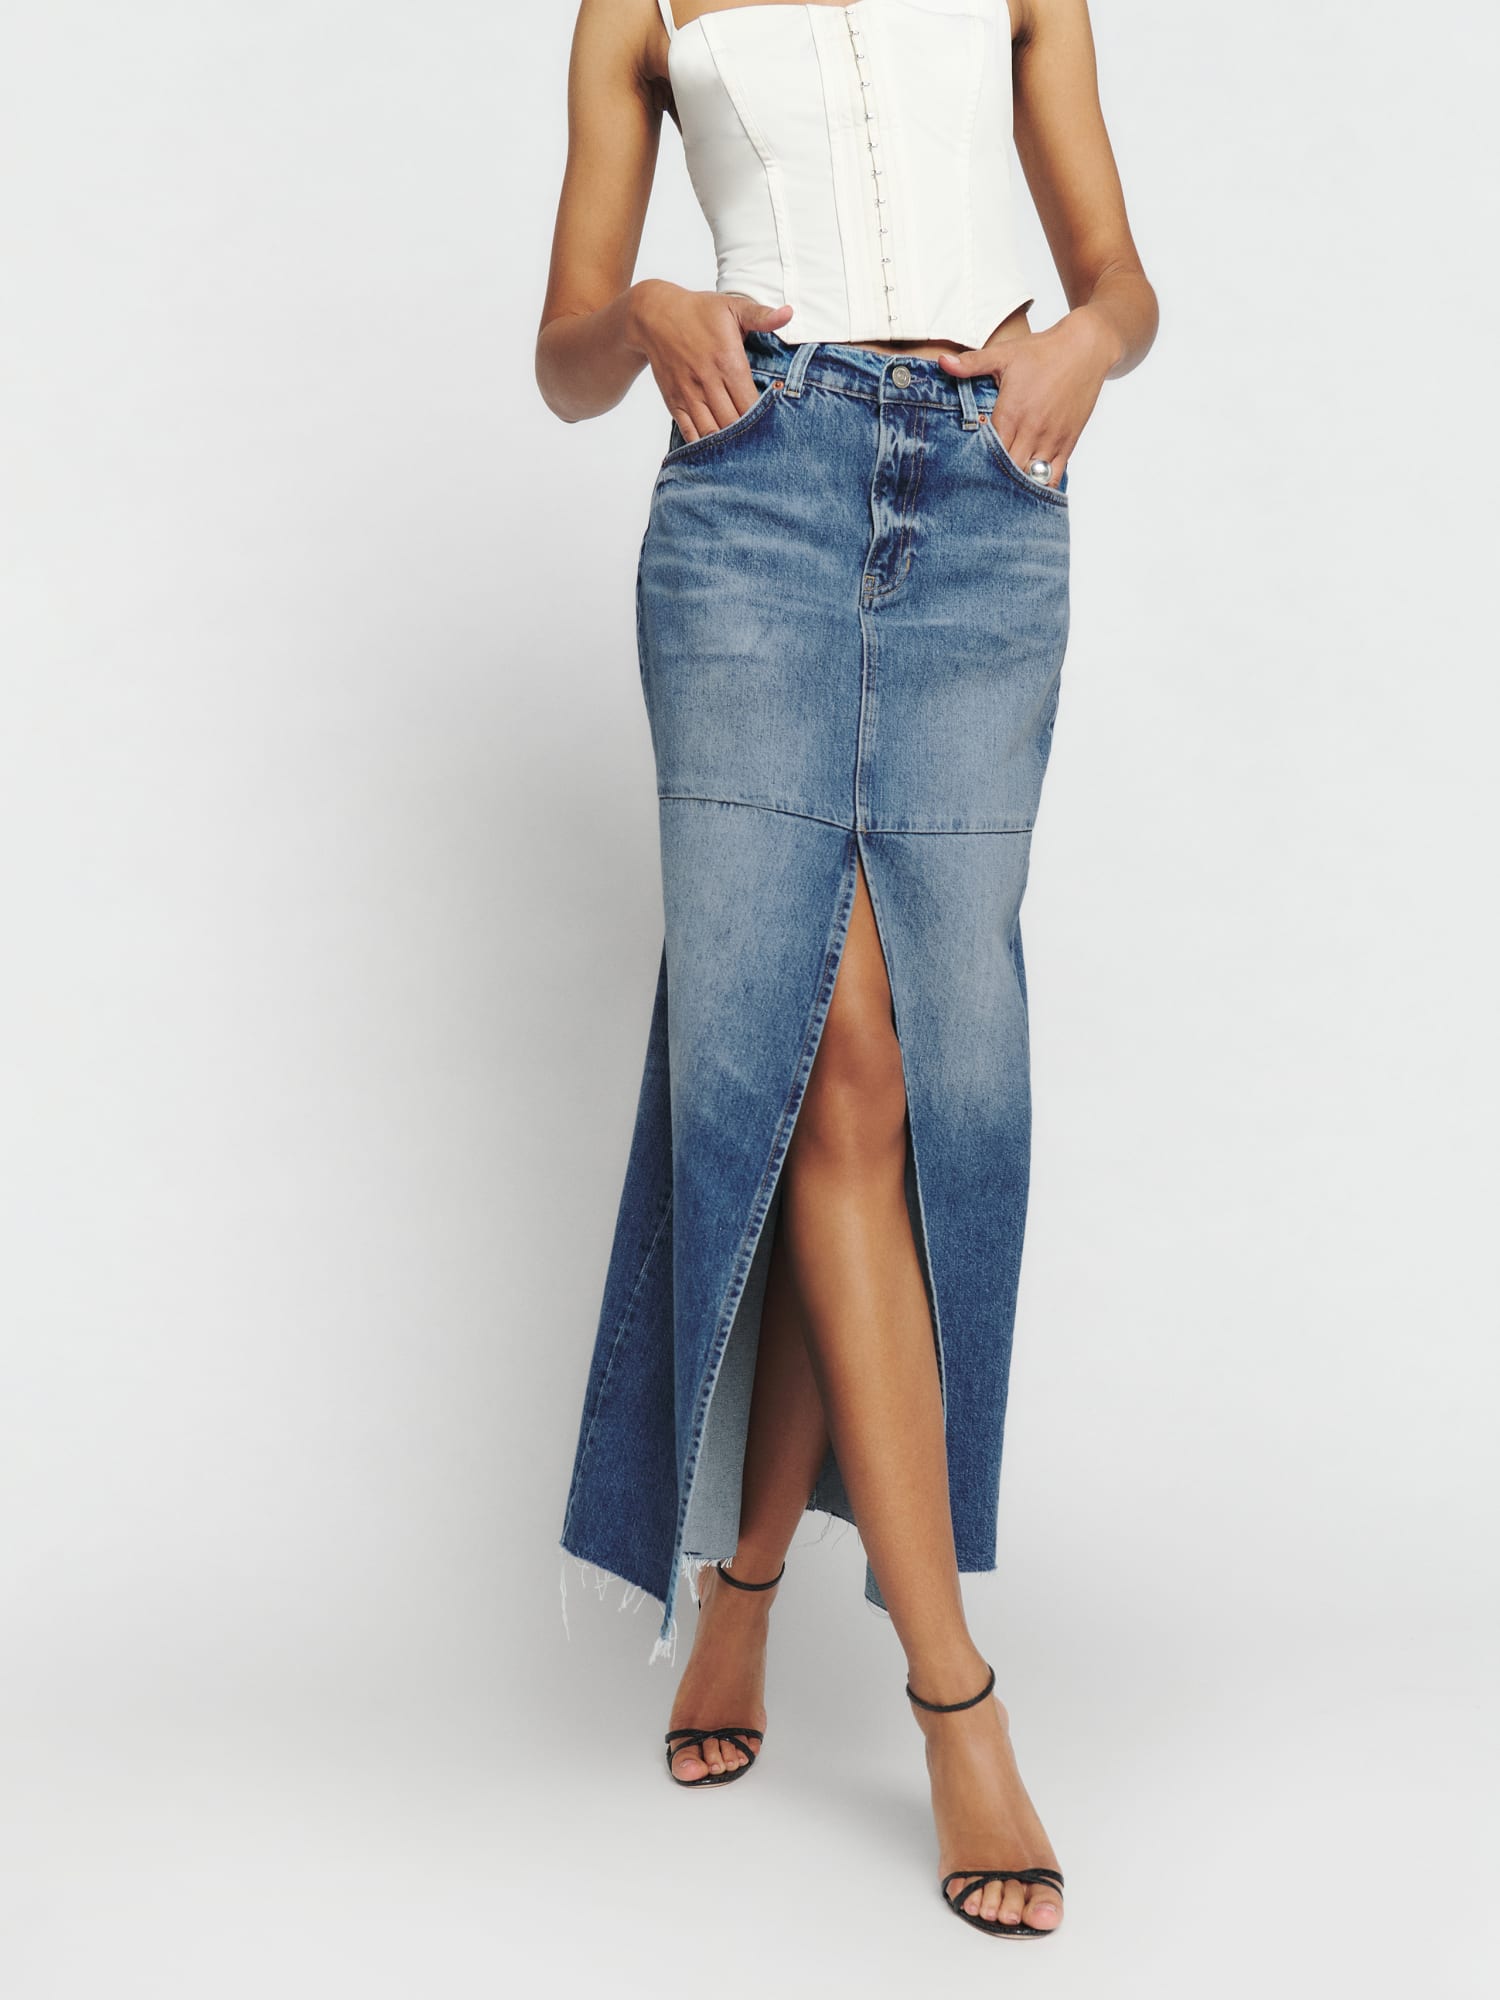 What is the difference between Jean Skirt and Denim Skirt